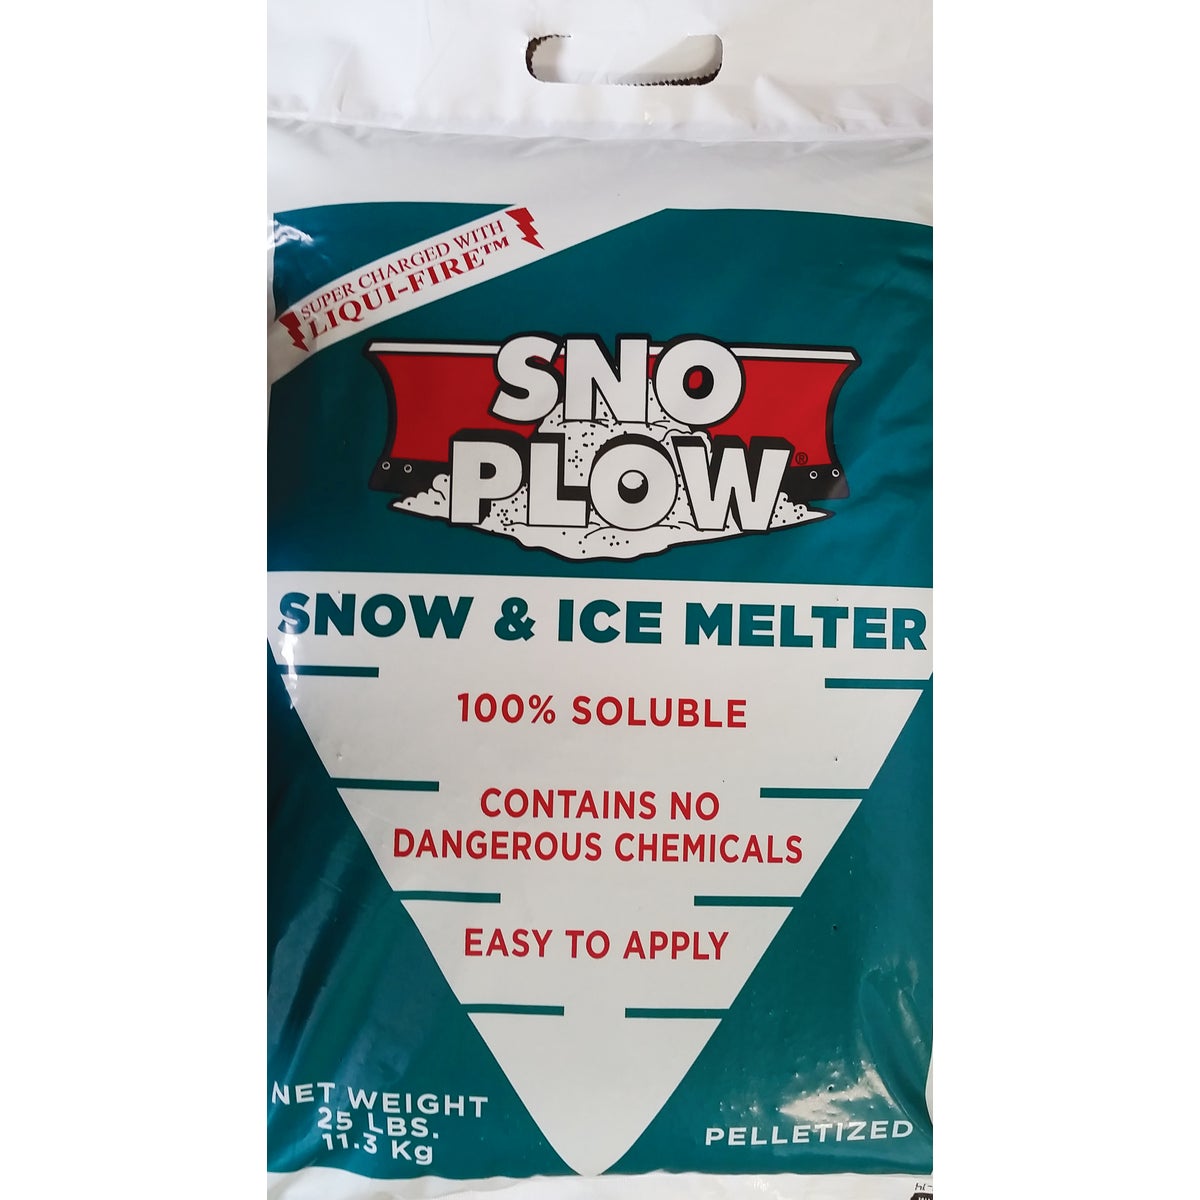 Item 703619, Ice melt super-charged with Liqui-Fire, a safe, magnesium coated product.